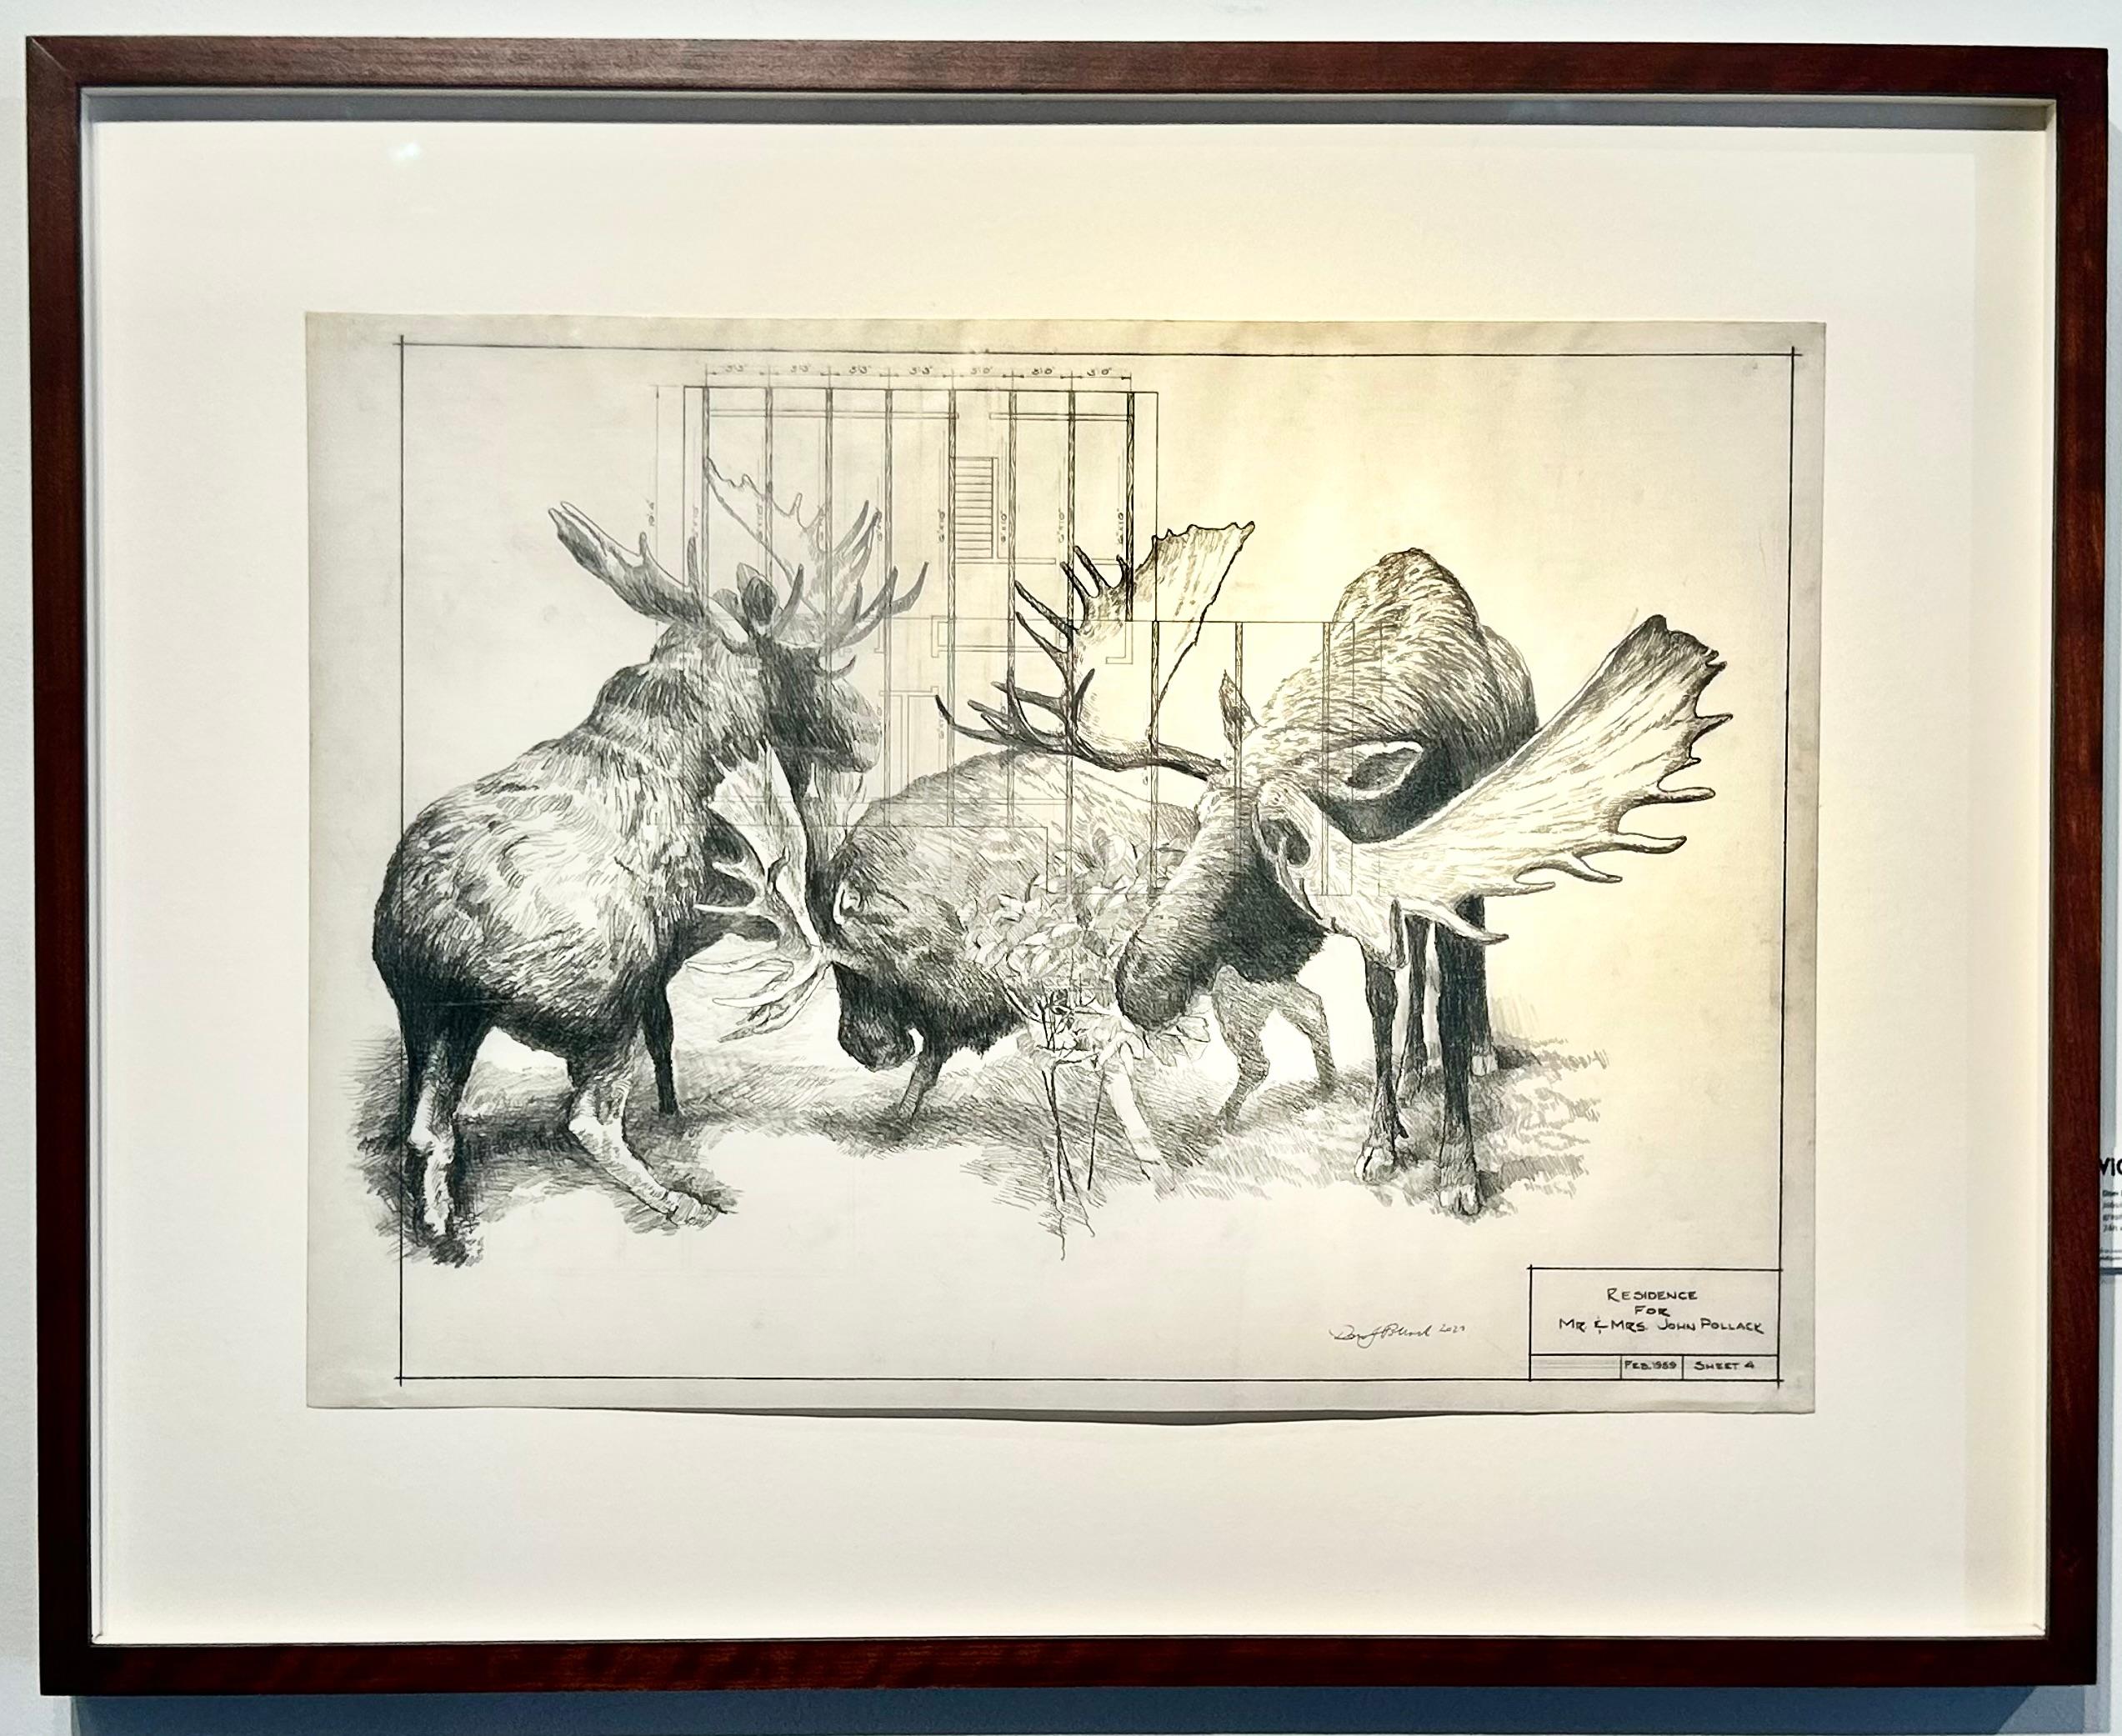 Jobsite - Moose in Graphite on Antique Architectural Drawings  - Art by Don Pollack